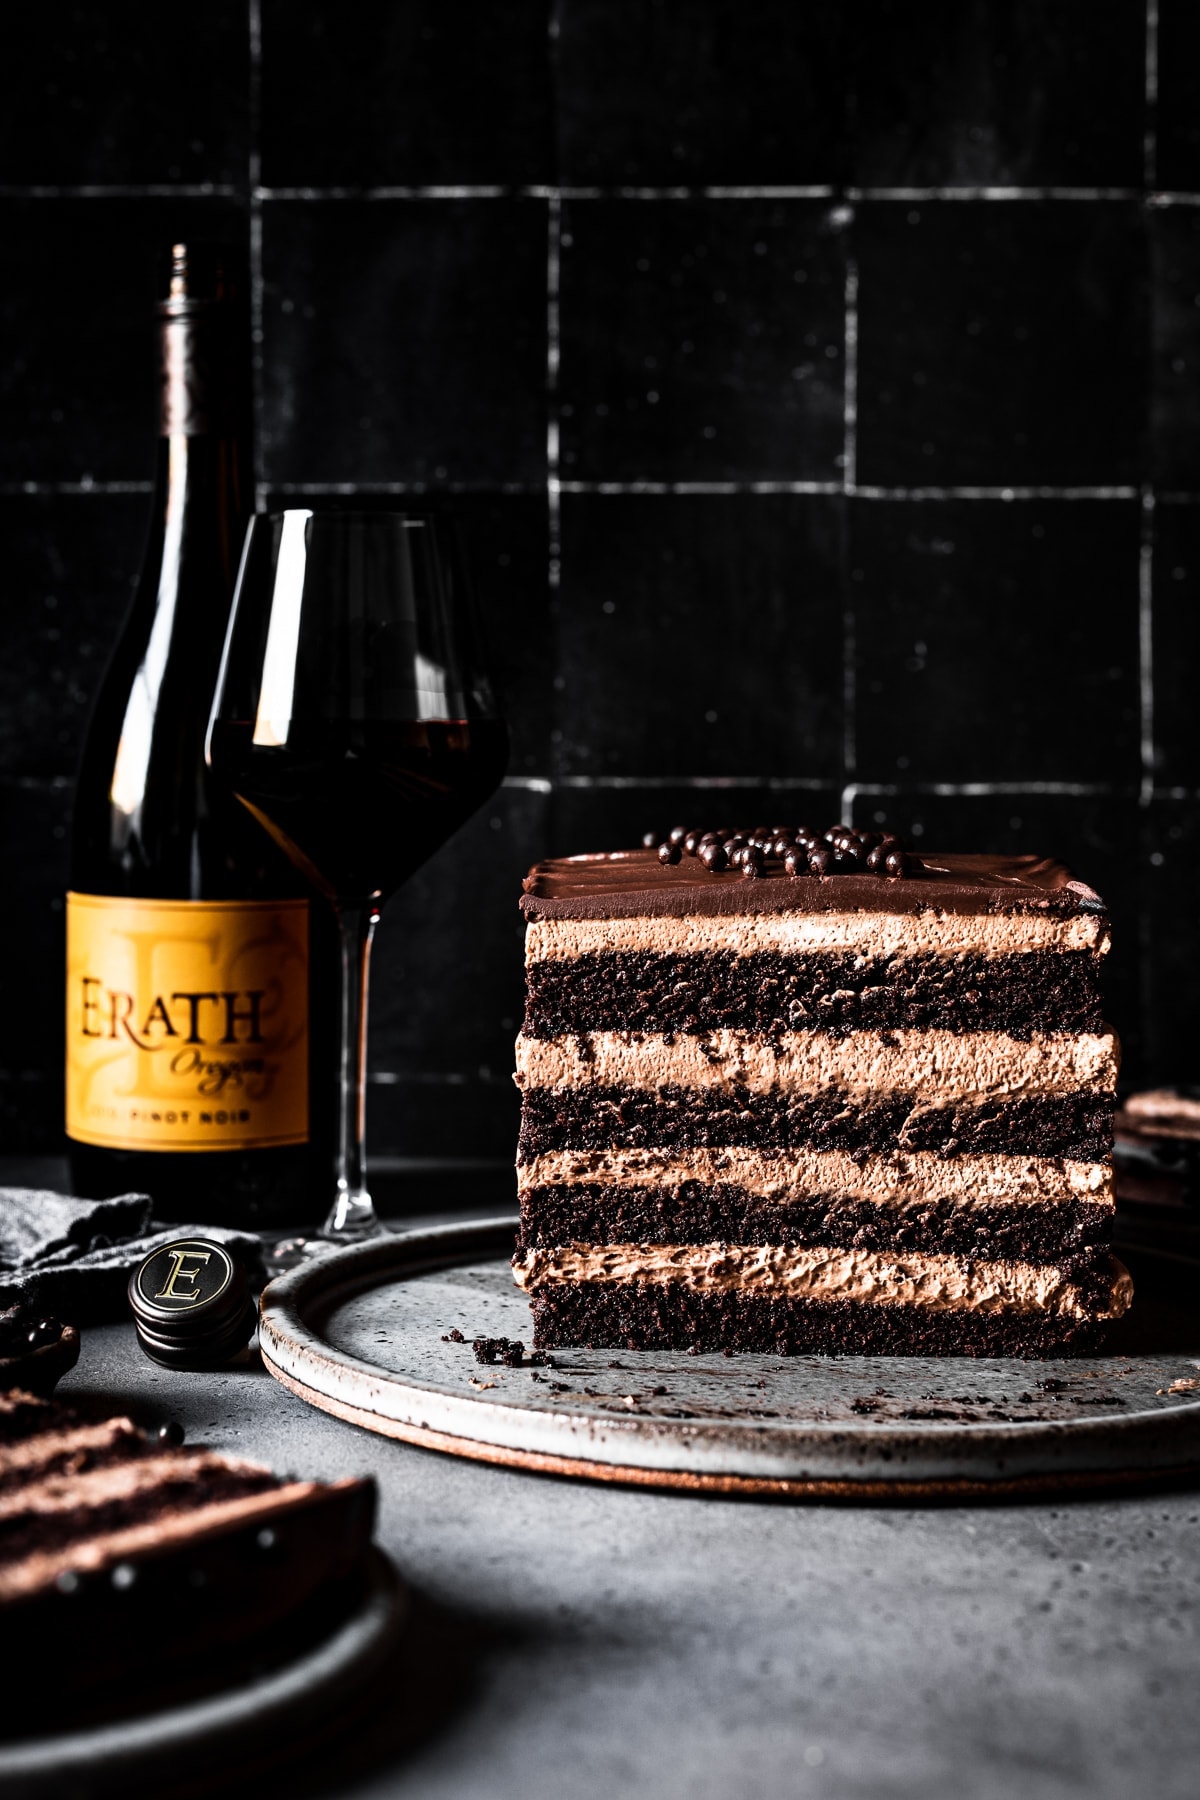 A layered rectangular cake with mousse filling on a grey speckled ceramic plate and grey stone surface with a black tile background. A ceramic plate with a slice of cake peeks out from the left front corner of the scene. A bottle of red wine with an orange-yellow label and a full glass of red wine are slightly out of focus on the left side of the scene. 